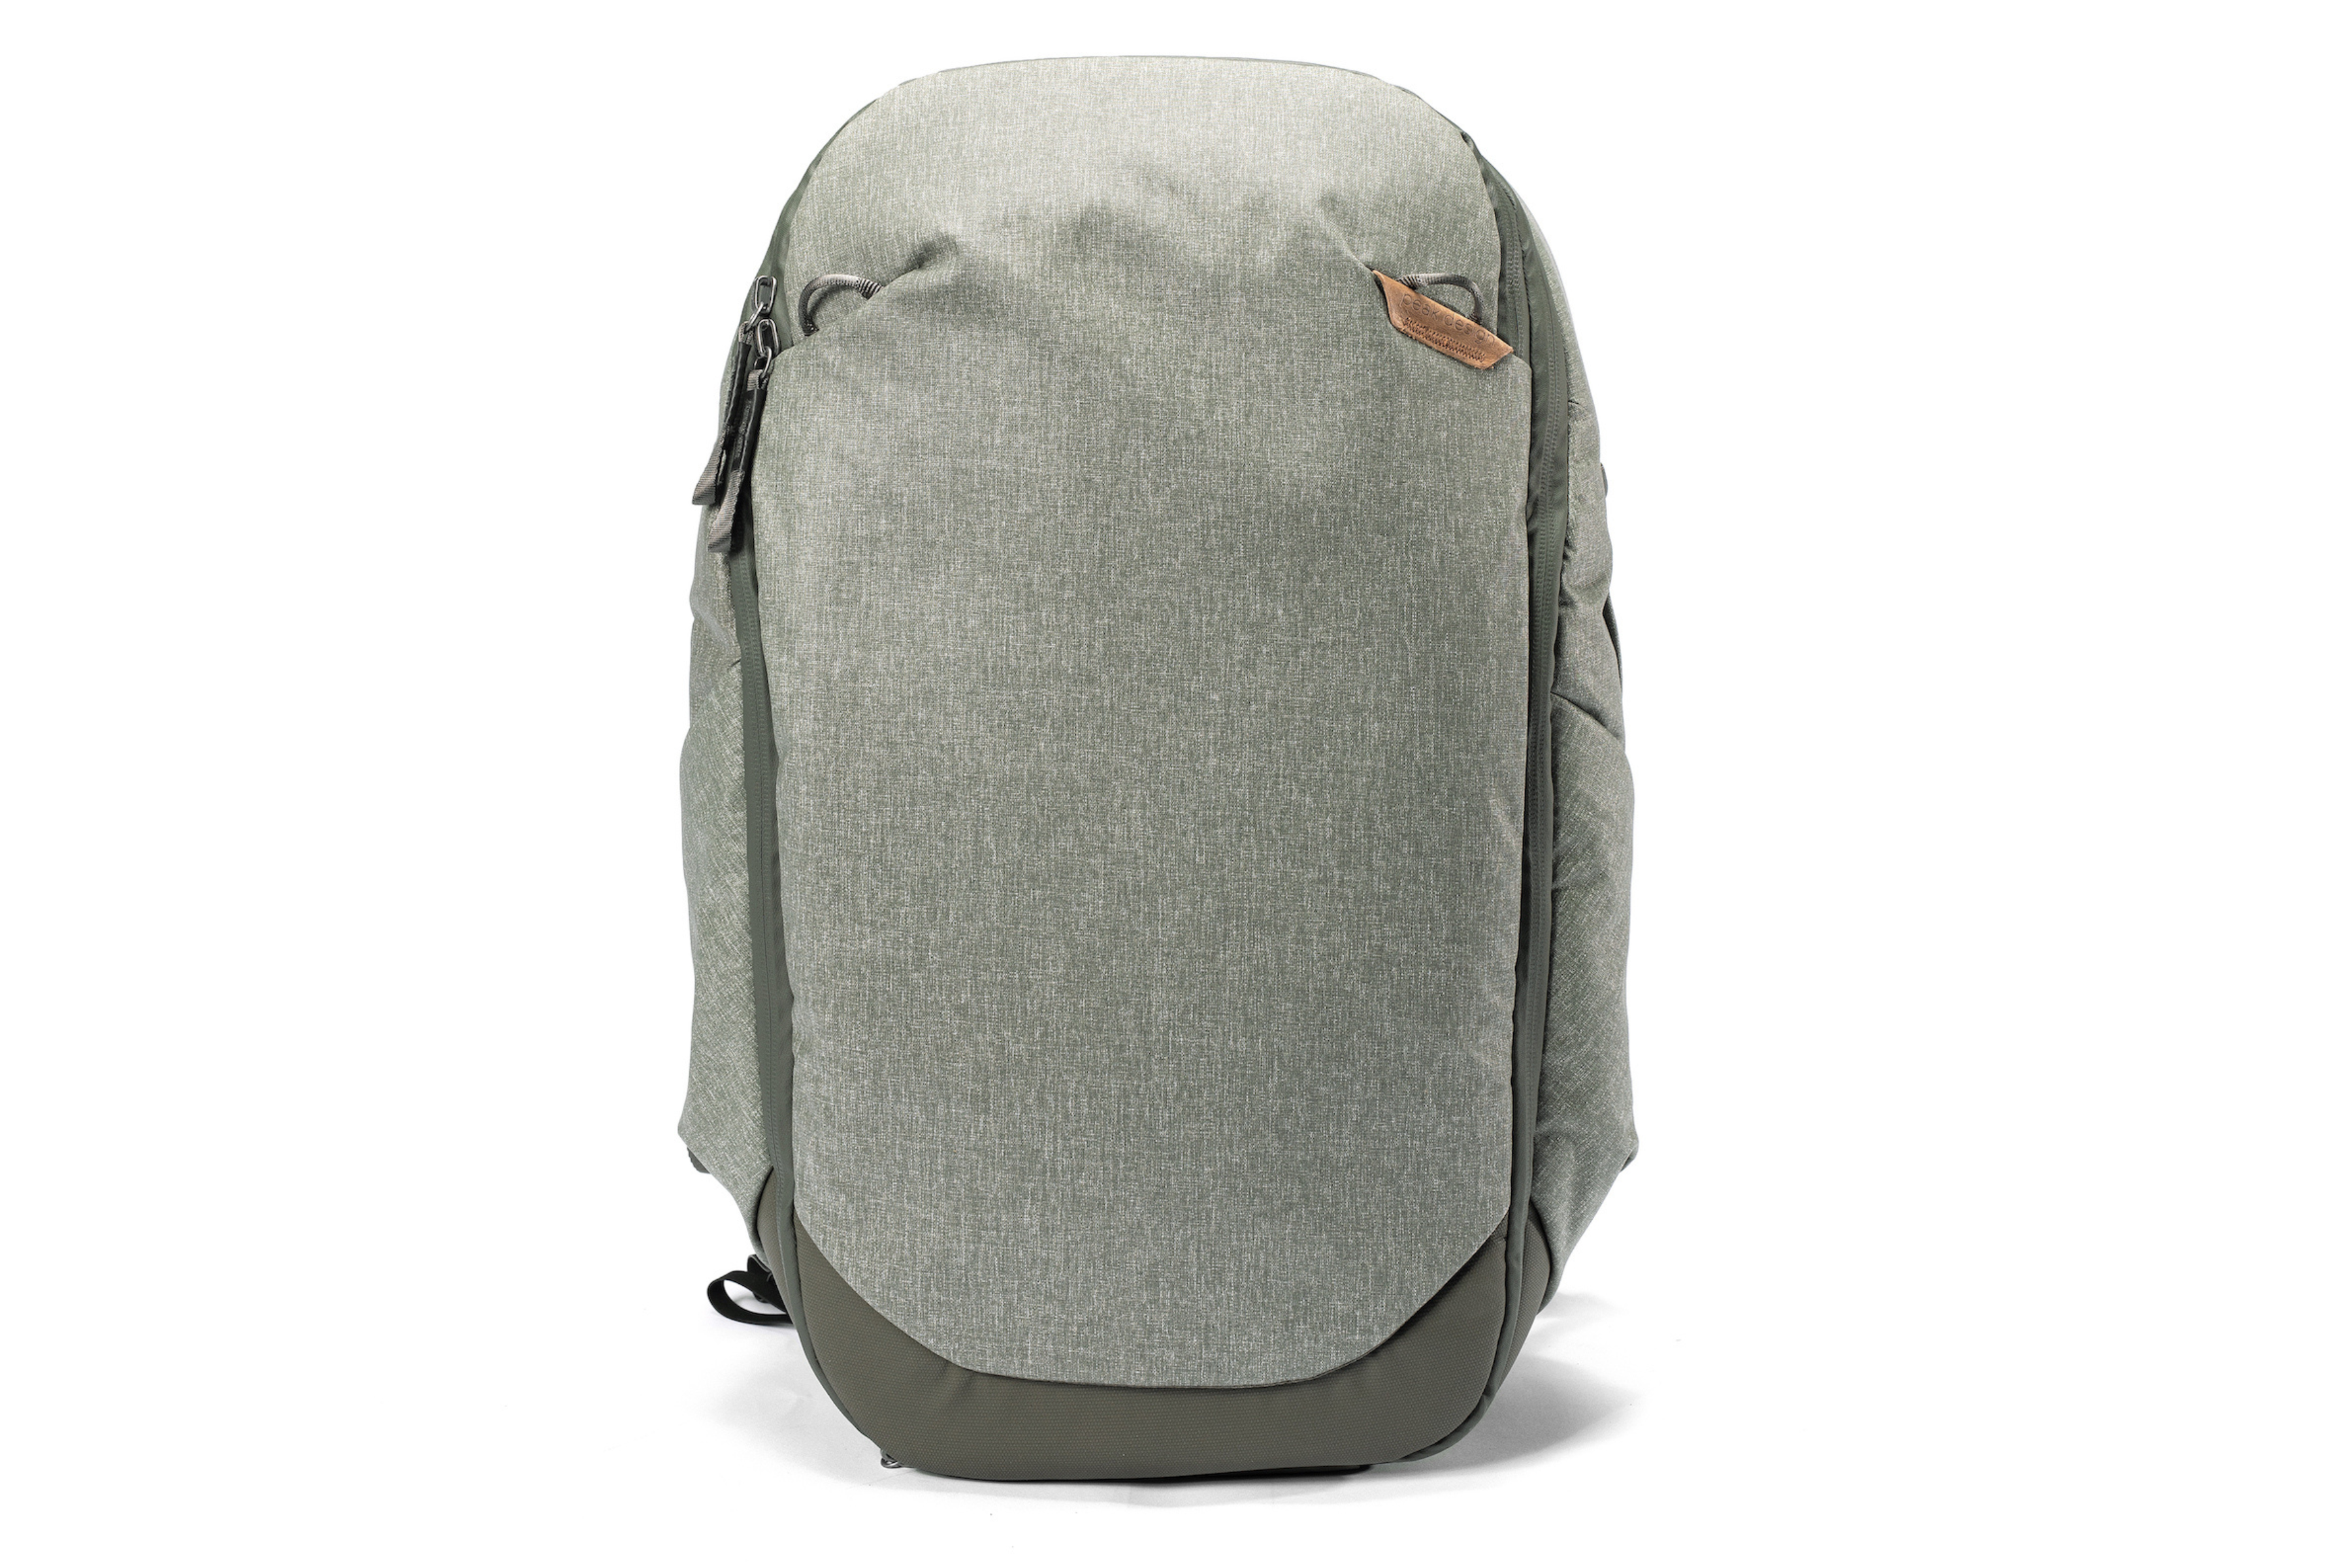 Peak Design has come out with a 30-litre travel backpack